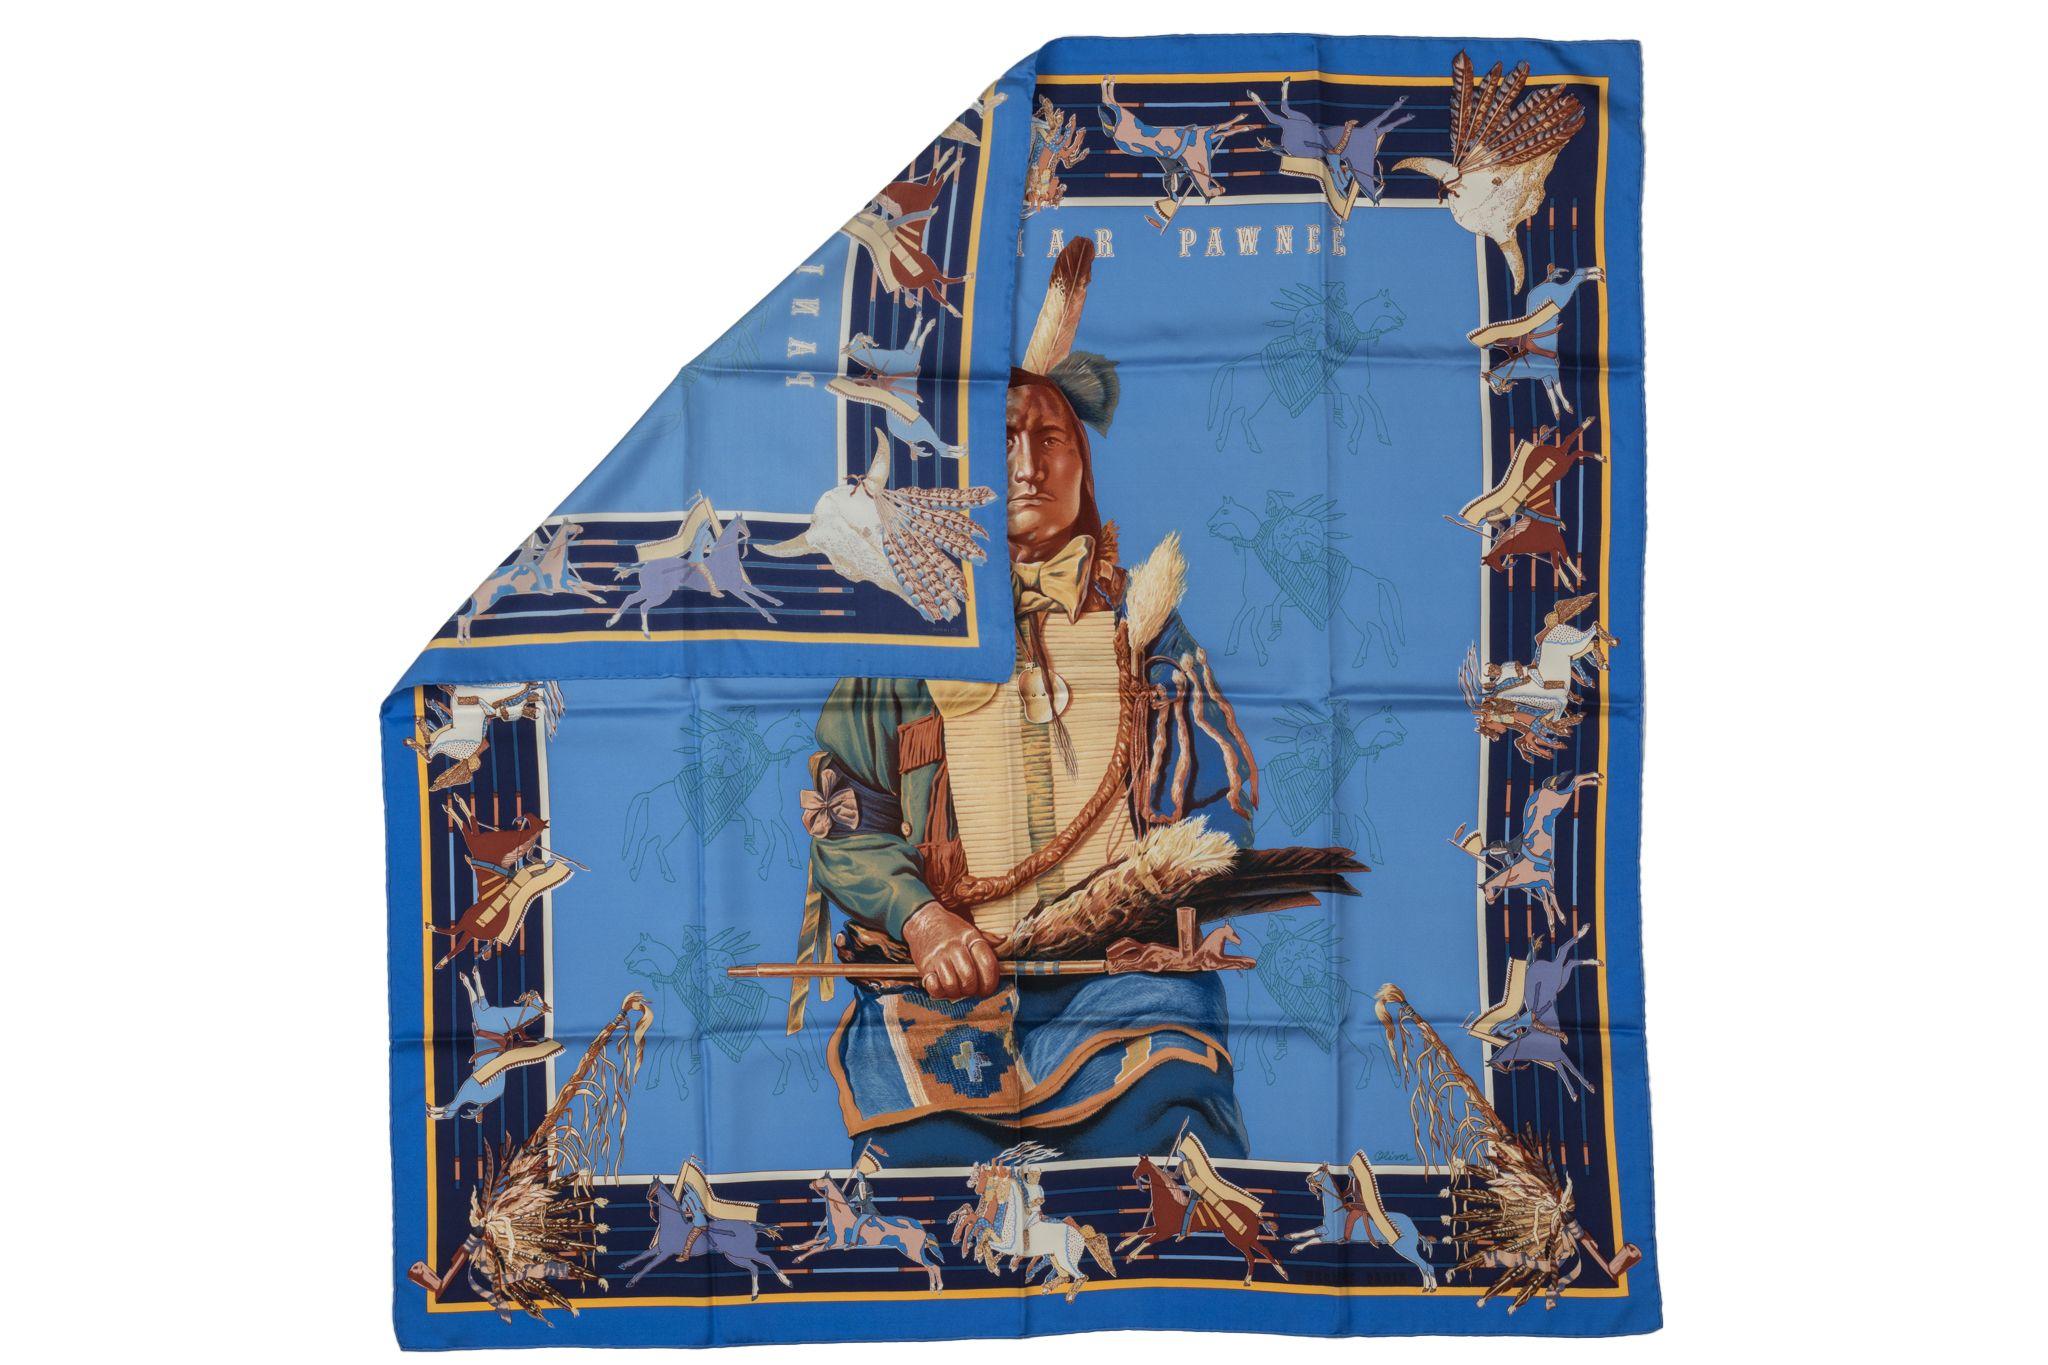 Hermès light blue silk twill Pani la Shar Pawnee scarf designed by Texan artist Kermit Oliver. Issues in 1994. Signature Native American illustration with ornate detail. Hand-rolled edges.